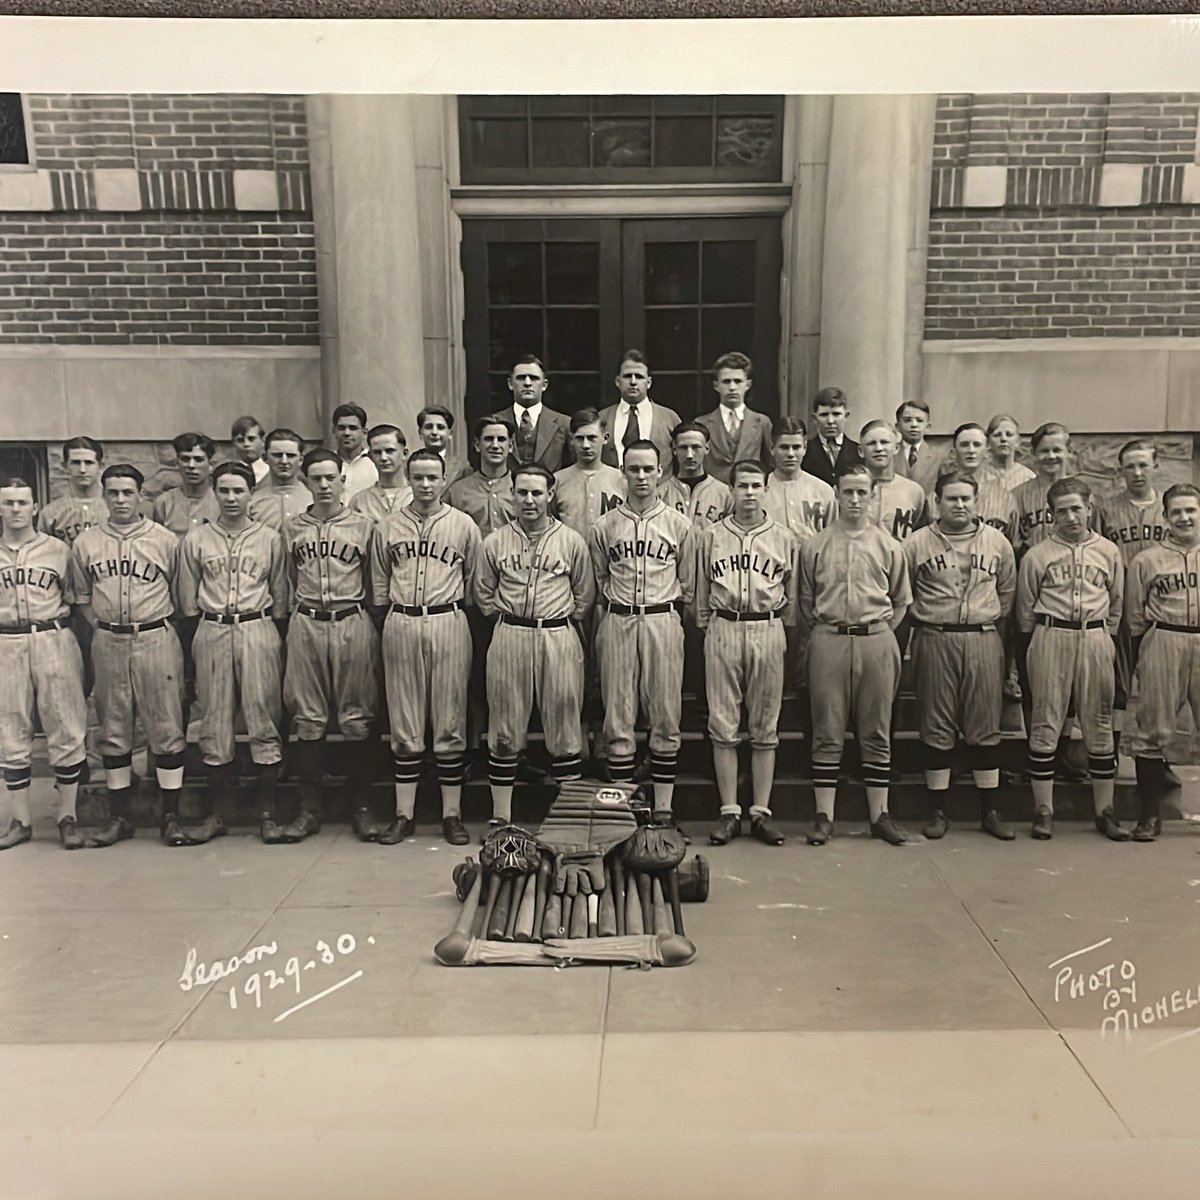 Throwing it WAY back to 1930 with this gem!📸. Mt. Holly High School Baseball team paved the way for the legacy we continue today. 

Recognize any faces? Drop a comment if you know anyone, or share your thoughts on the good ol’ days!! ⚾️🧢 #VintageBaseball #BaseballNostalgia